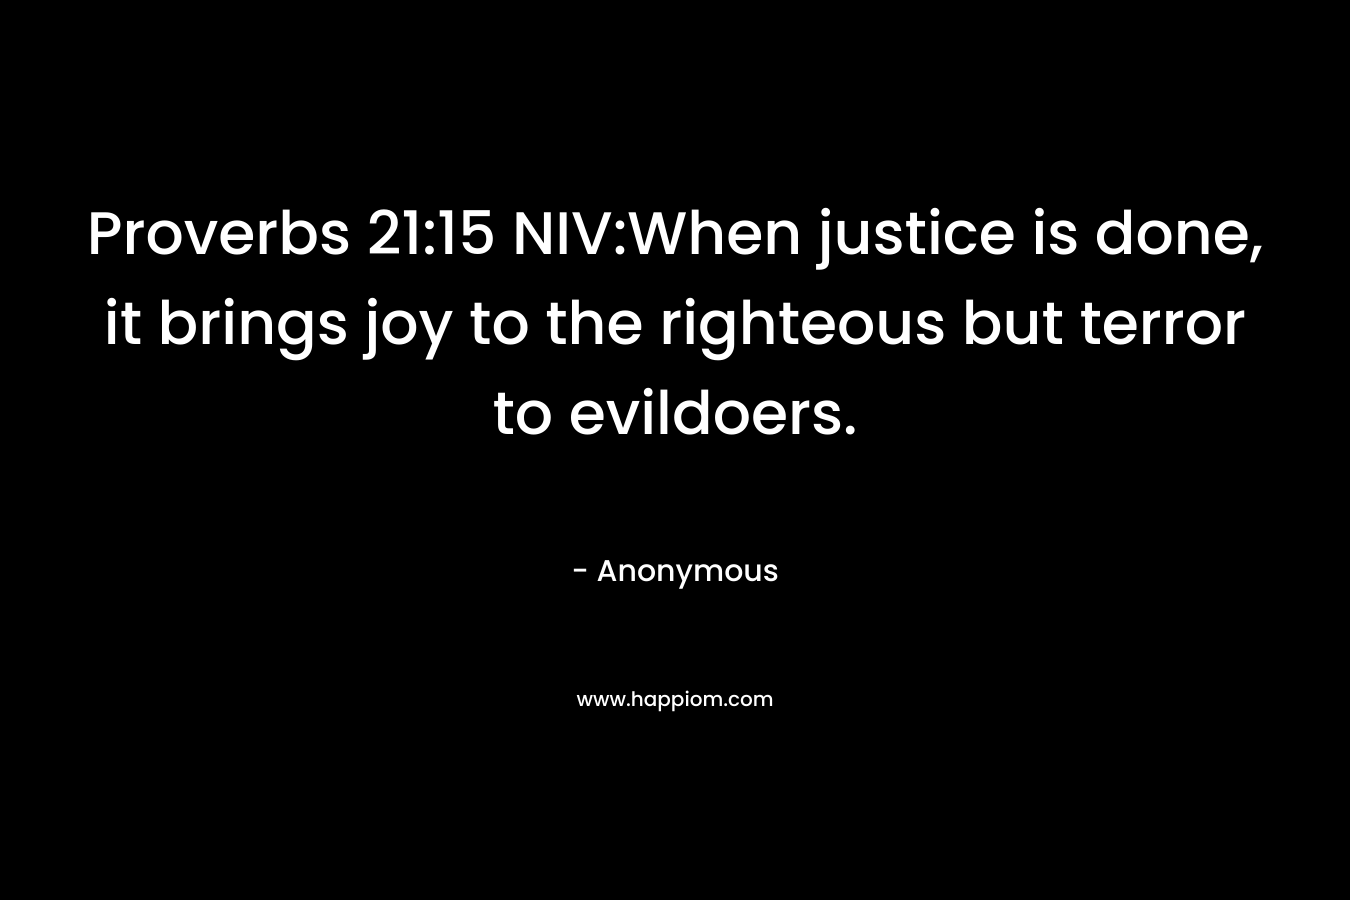 Proverbs 21:15 NIV:When justice is done, it brings joy to the righteous but terror to evildoers. – Anonymous